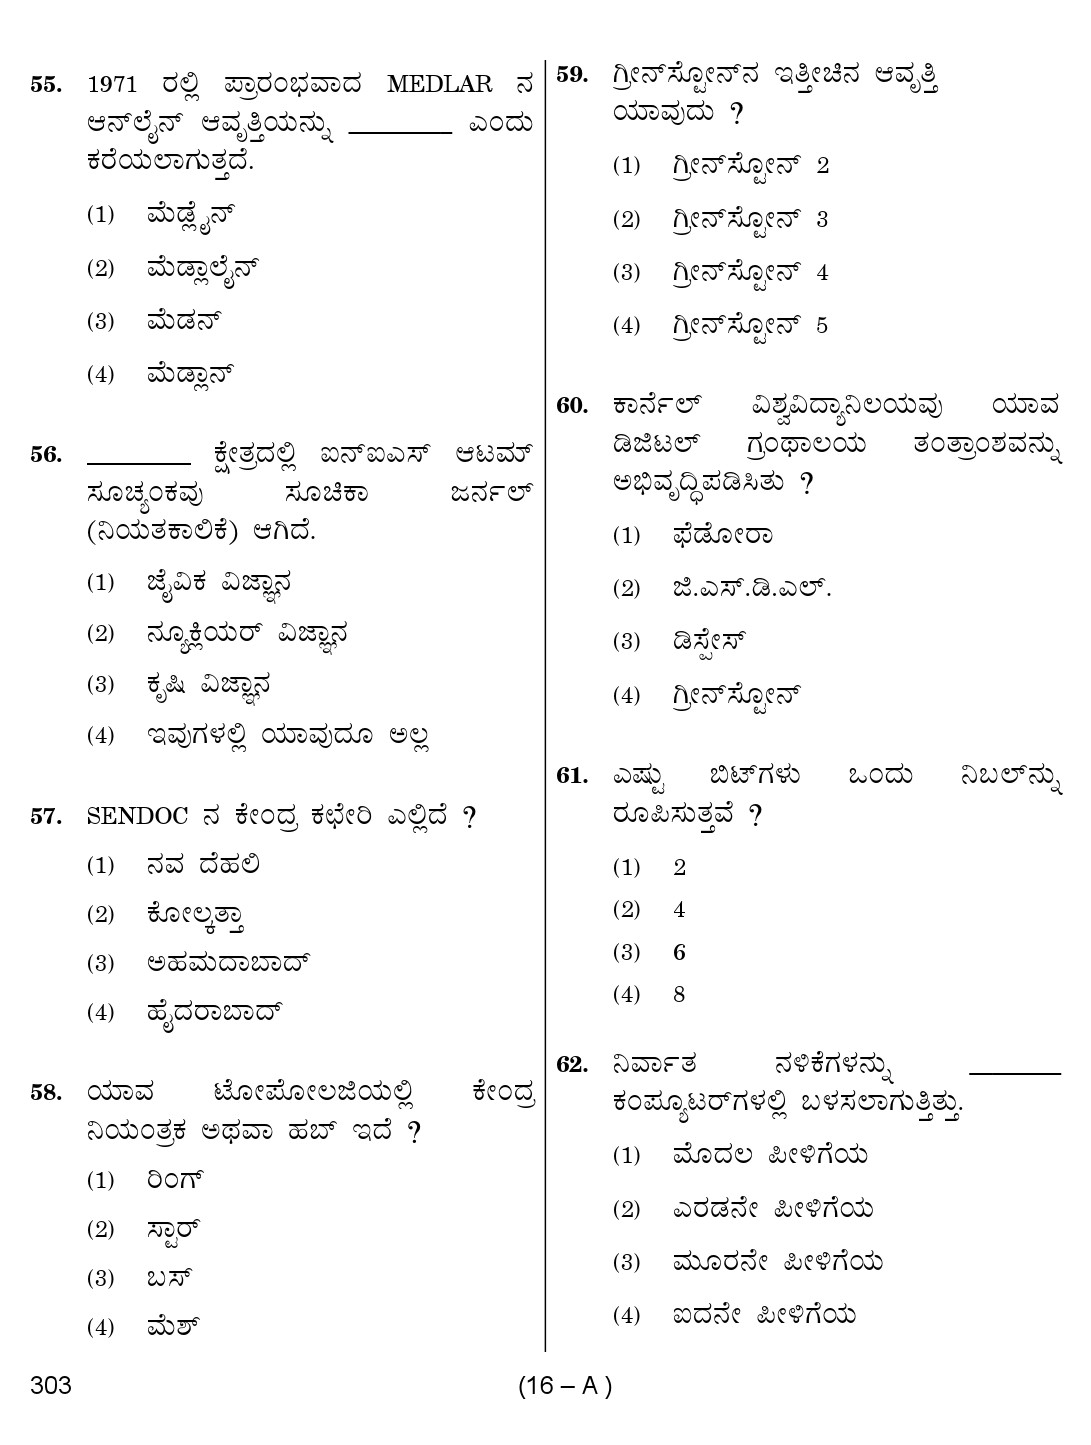 Karnataka PSC 303 Specific Paper II Librarian Exam Sample Question Paper 16